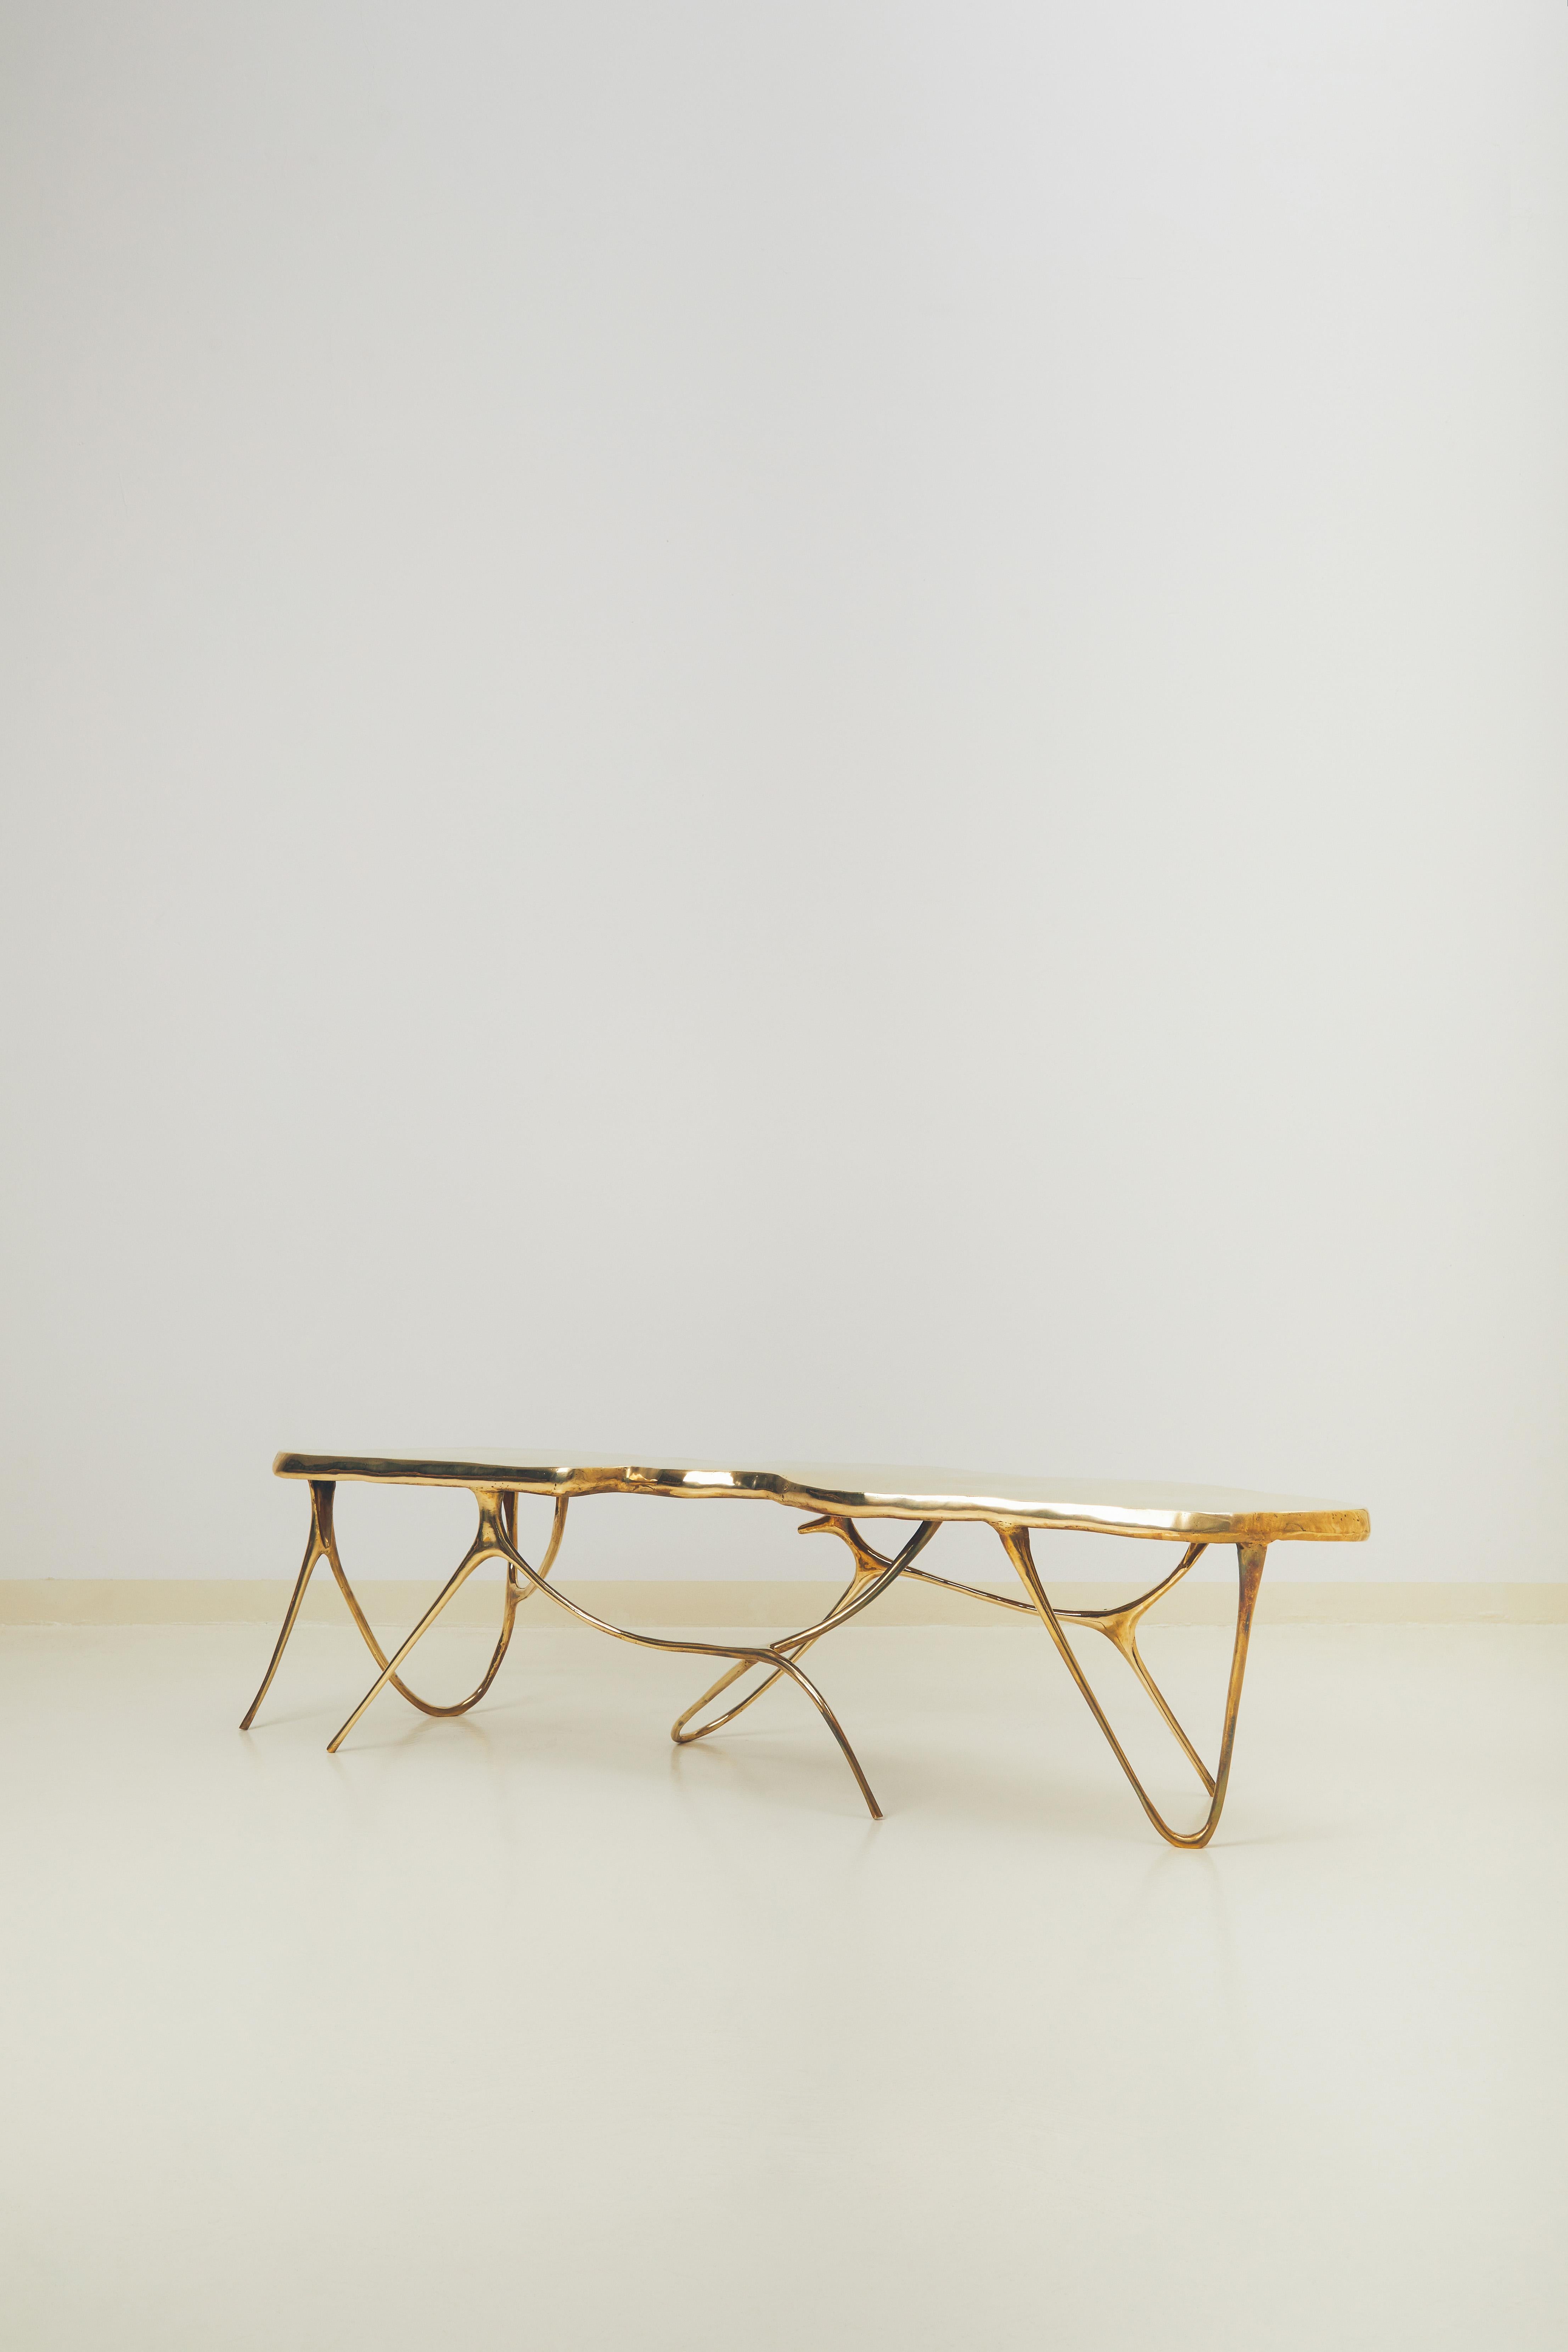 Calligraphic sculpted brass bench by Misaya.
Dimensions: W 158 x L 38 x H 40 cm
Materials: Brass.

Hand-sculpted brass bench.

Misaya emulates Chinese ink paintings through the process of lost-wax casting.

Each piece in the Ink collection,